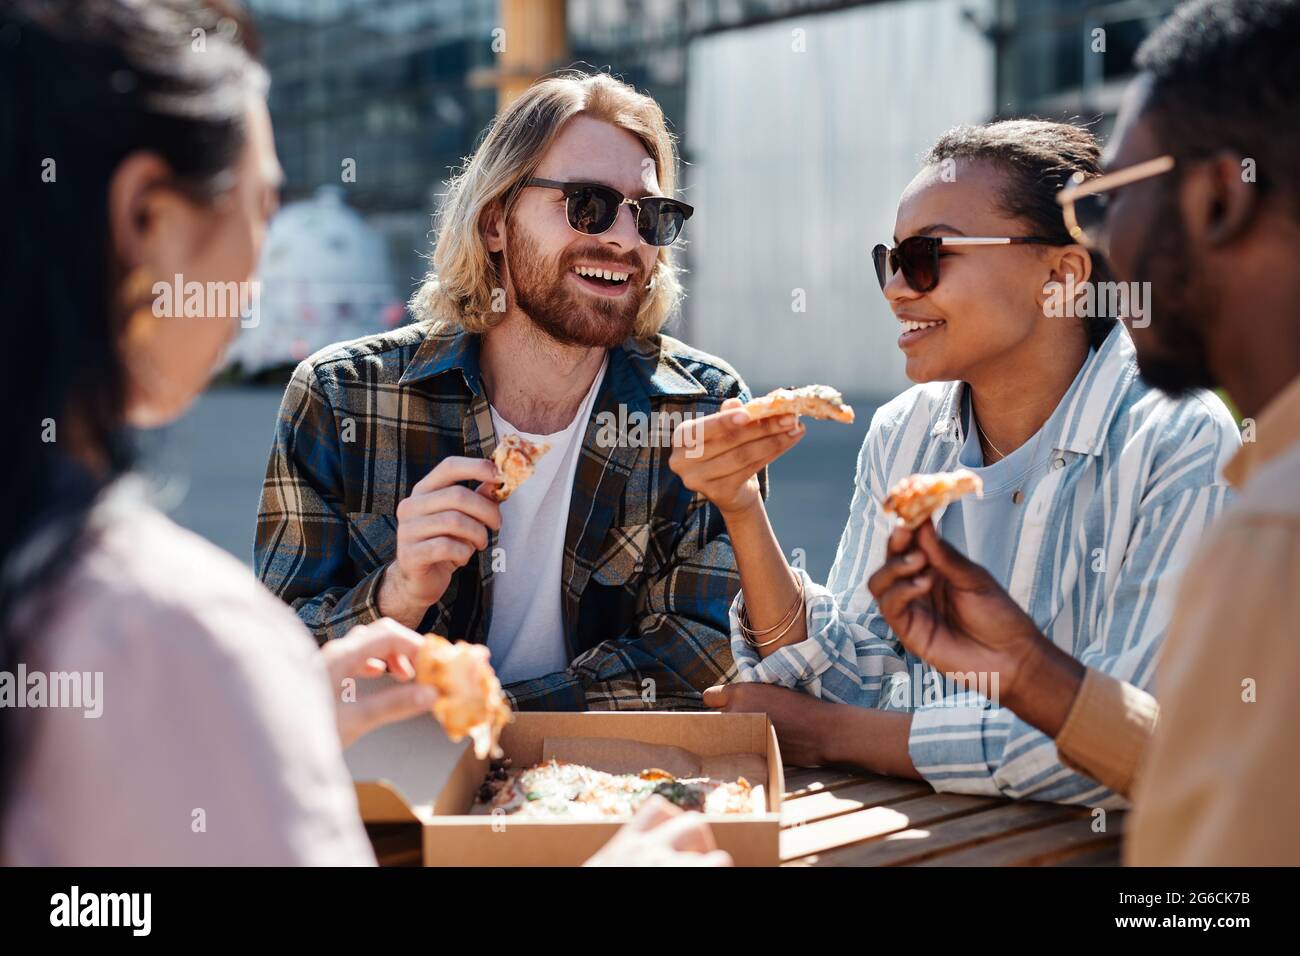 Diverse group of carefree young people enjoying pizza outdoors, scene lit by sunlight, copy space Stock Photo